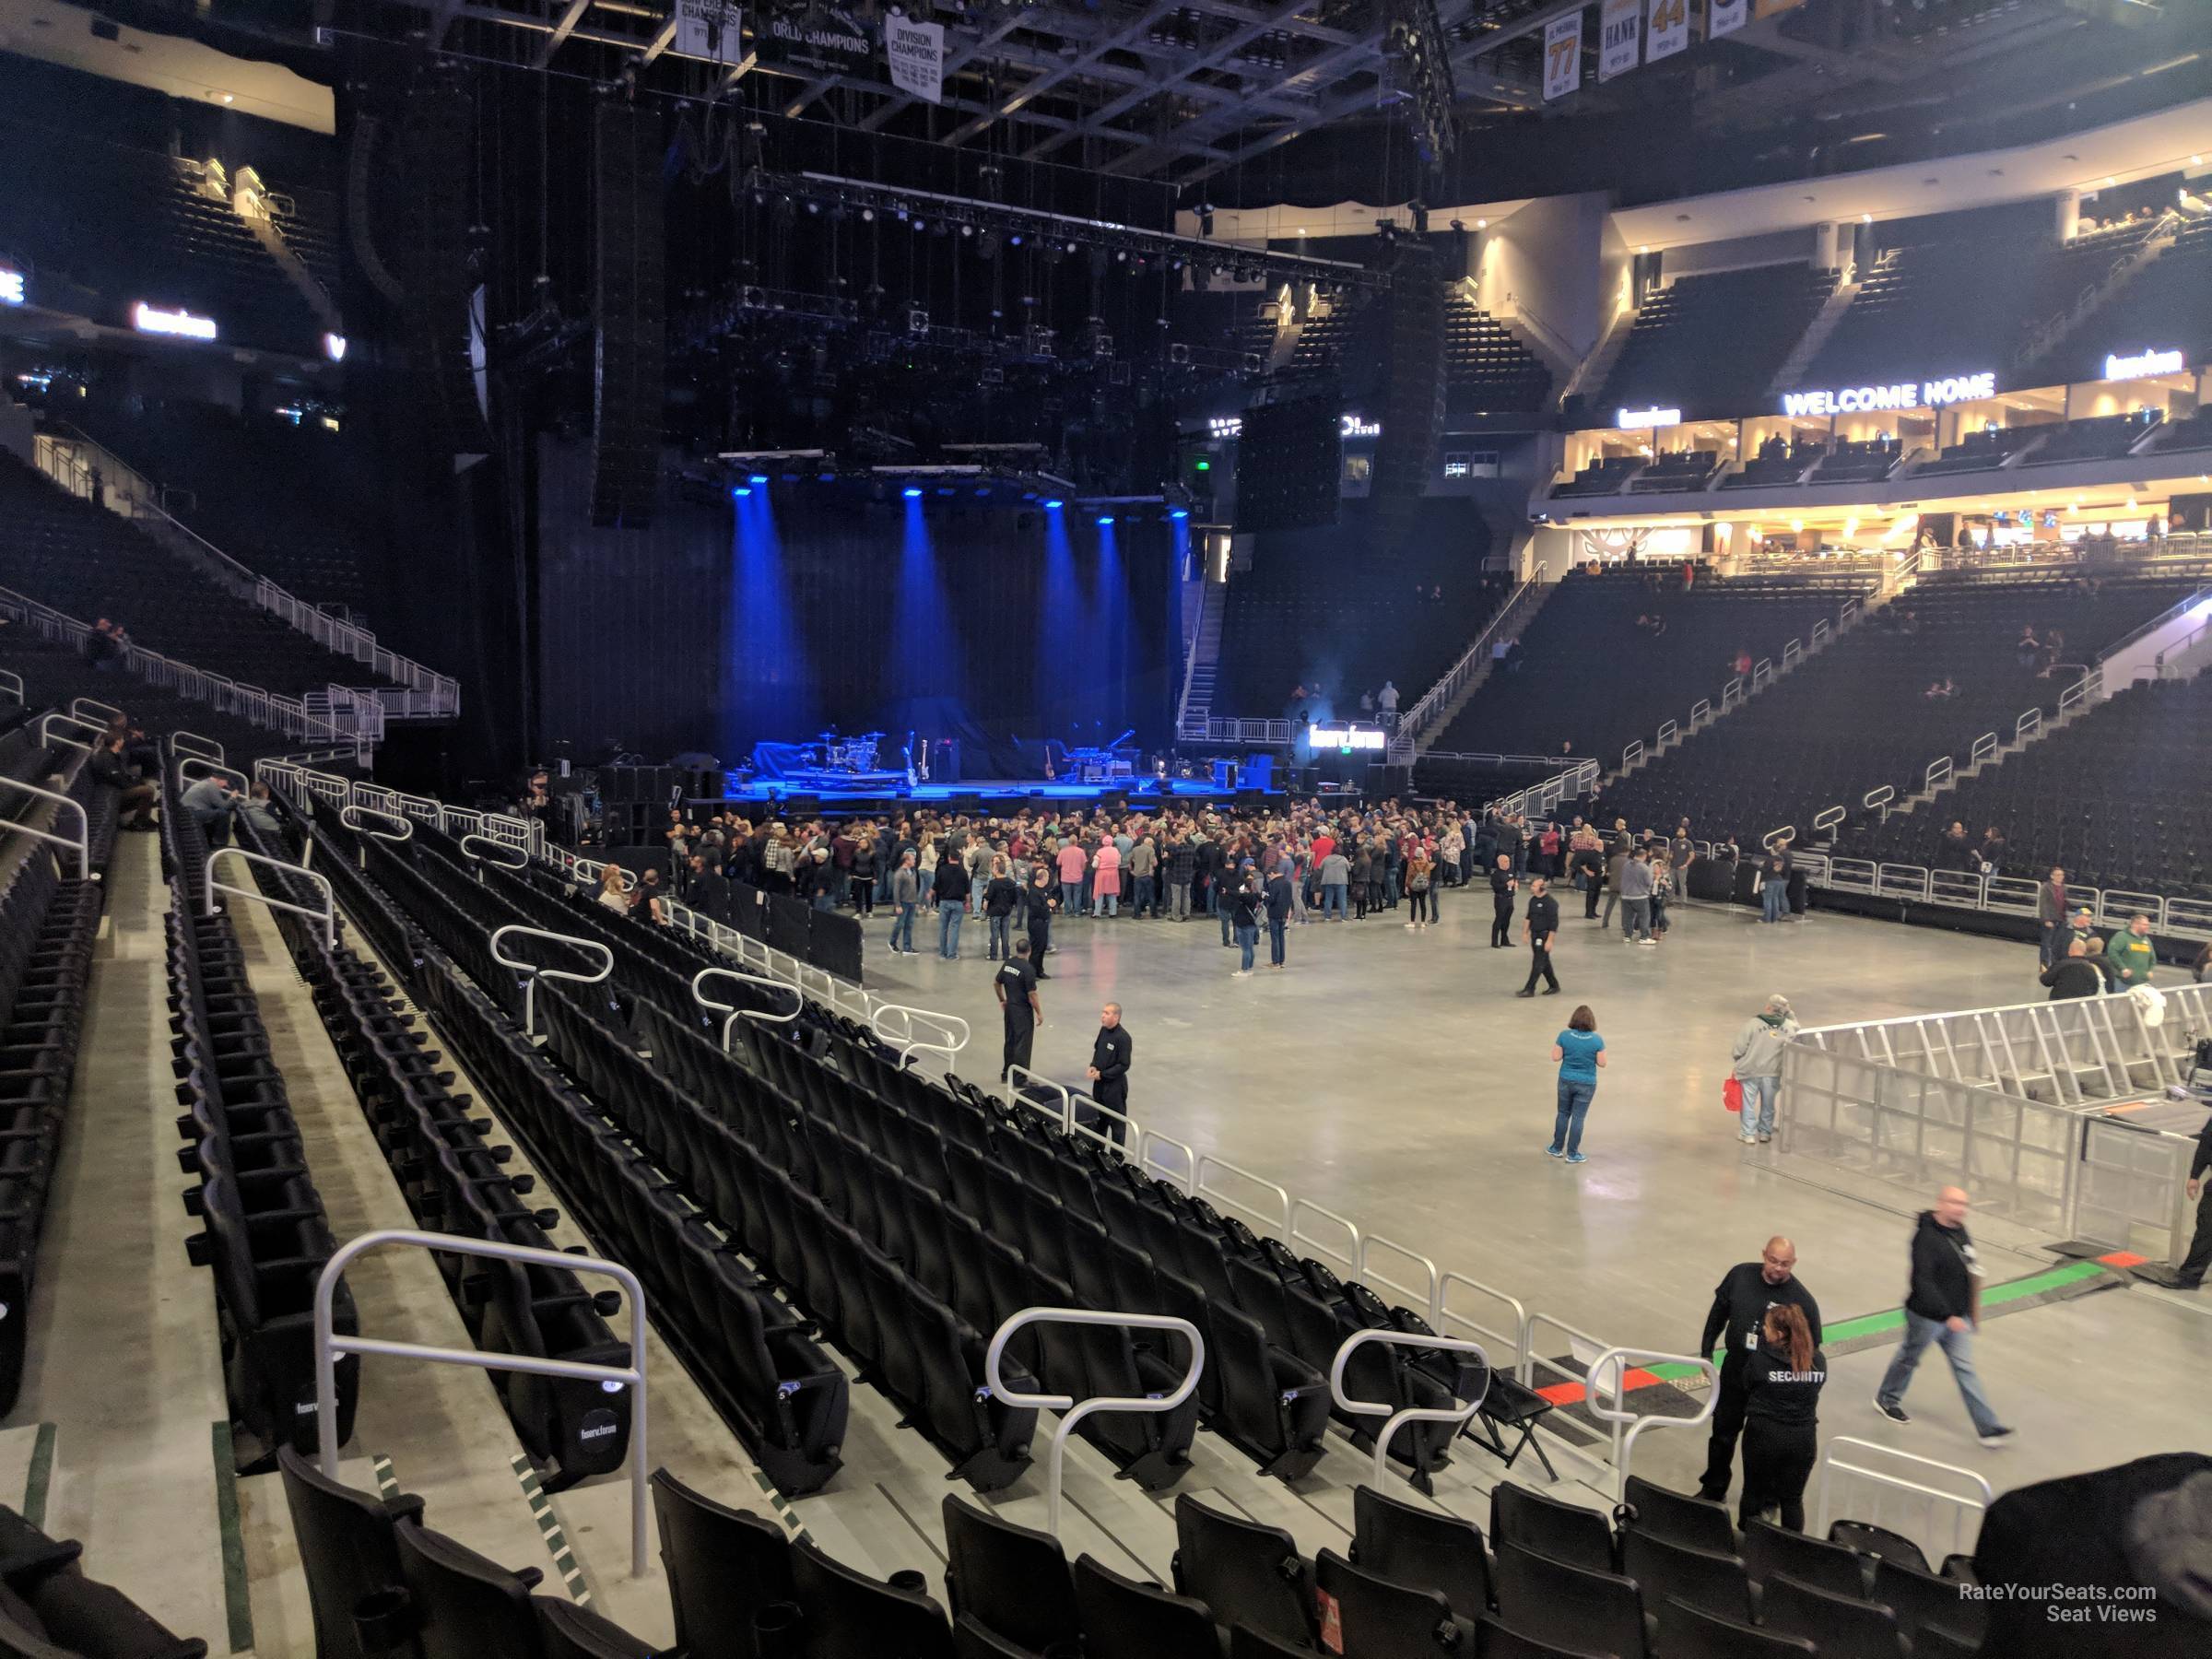 section 104, row 11 seat view  for concert - fiserv forum